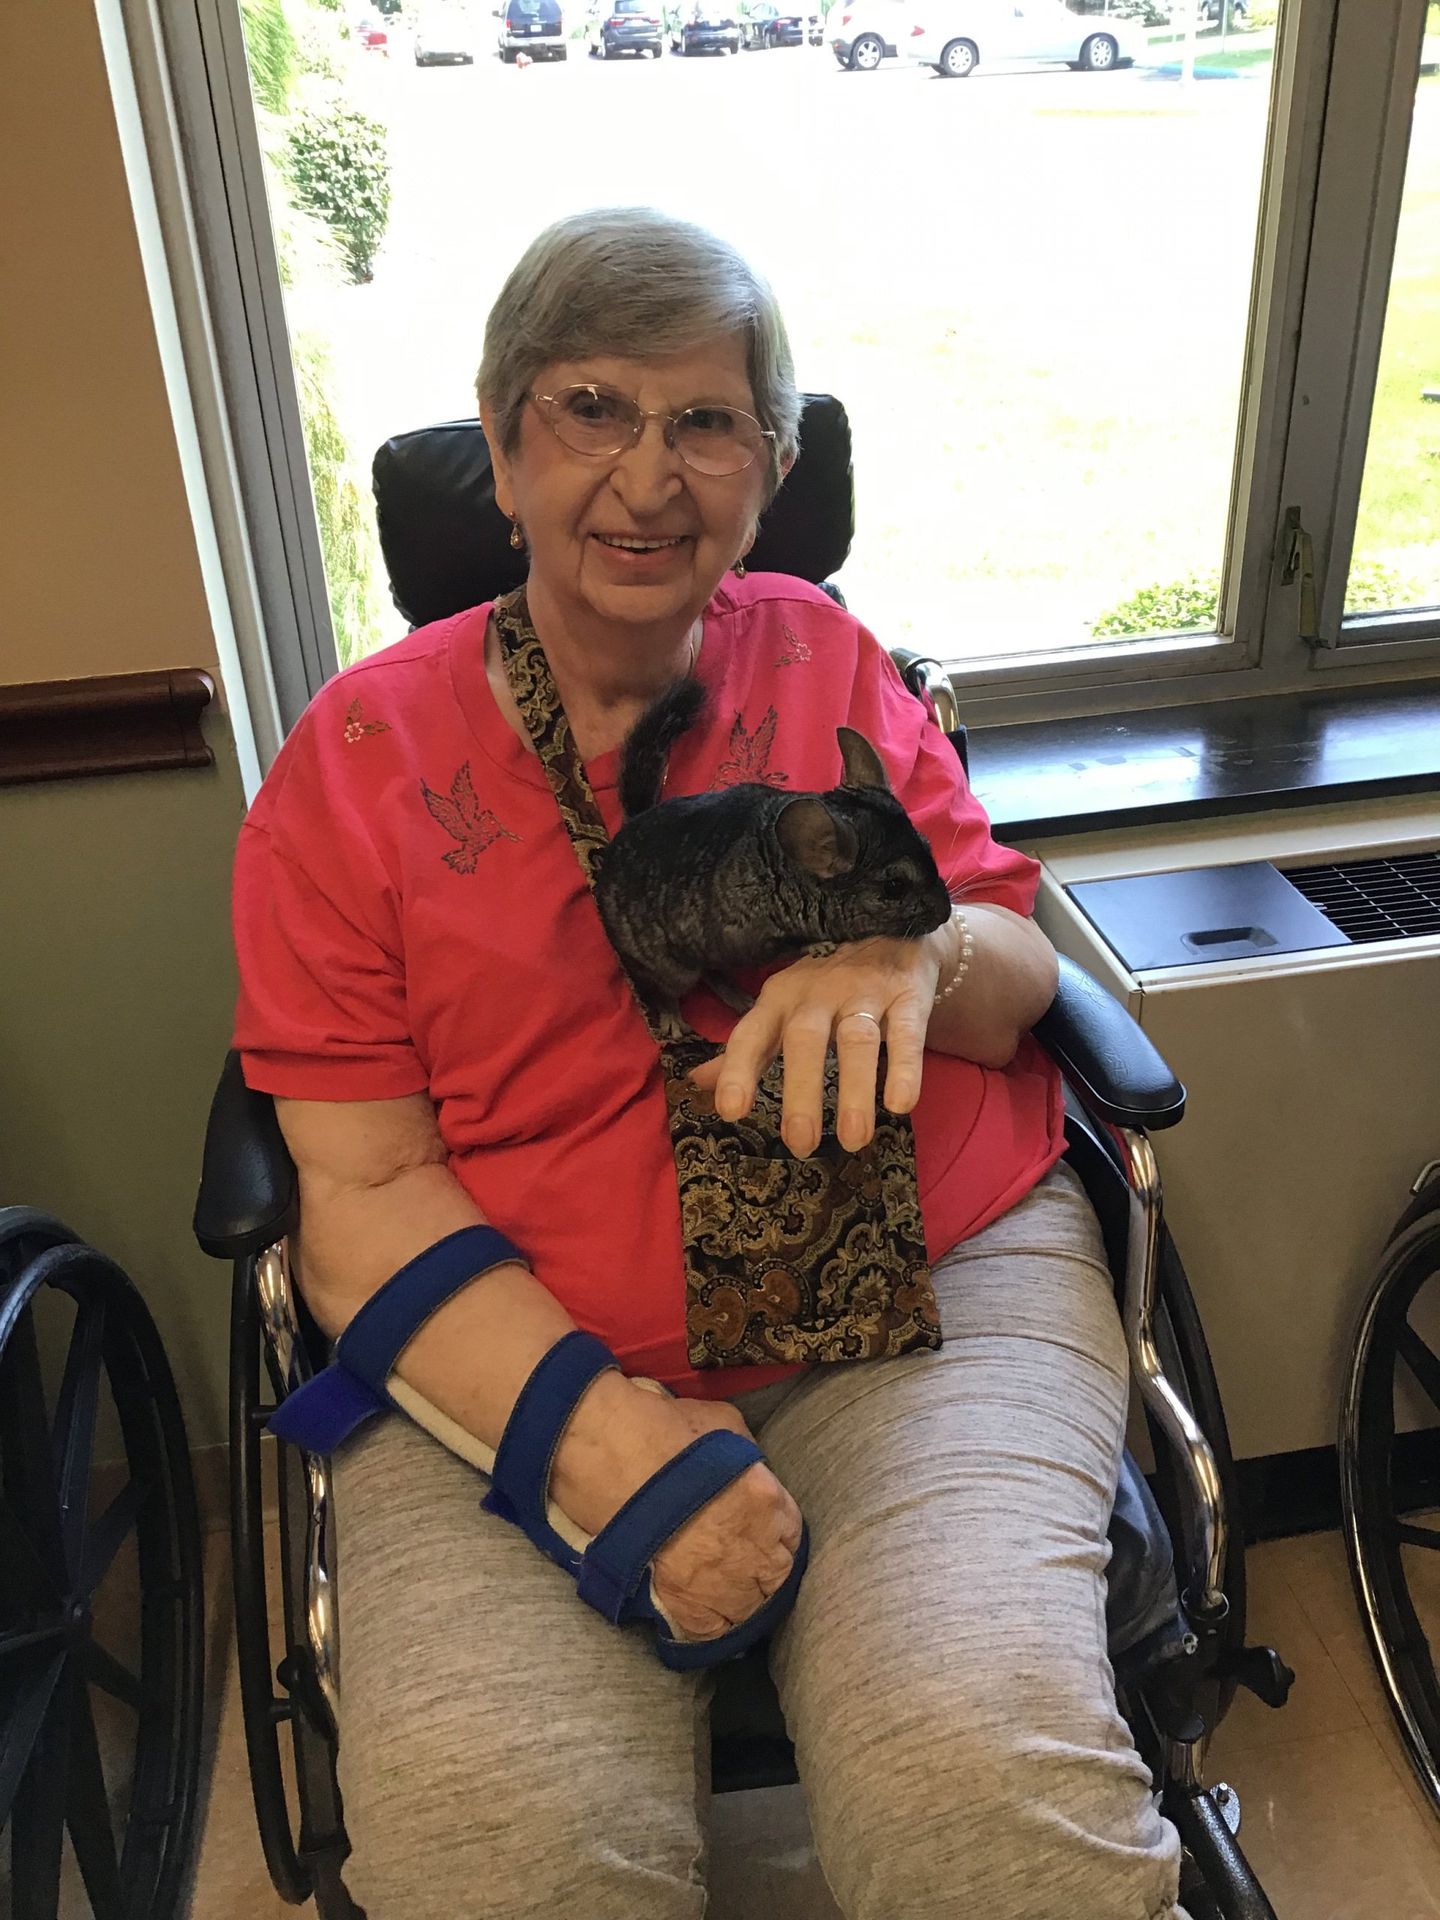 Elder holding chinchilla during pet therapy at Lenawee Medical Care Facility in Adrian, MI